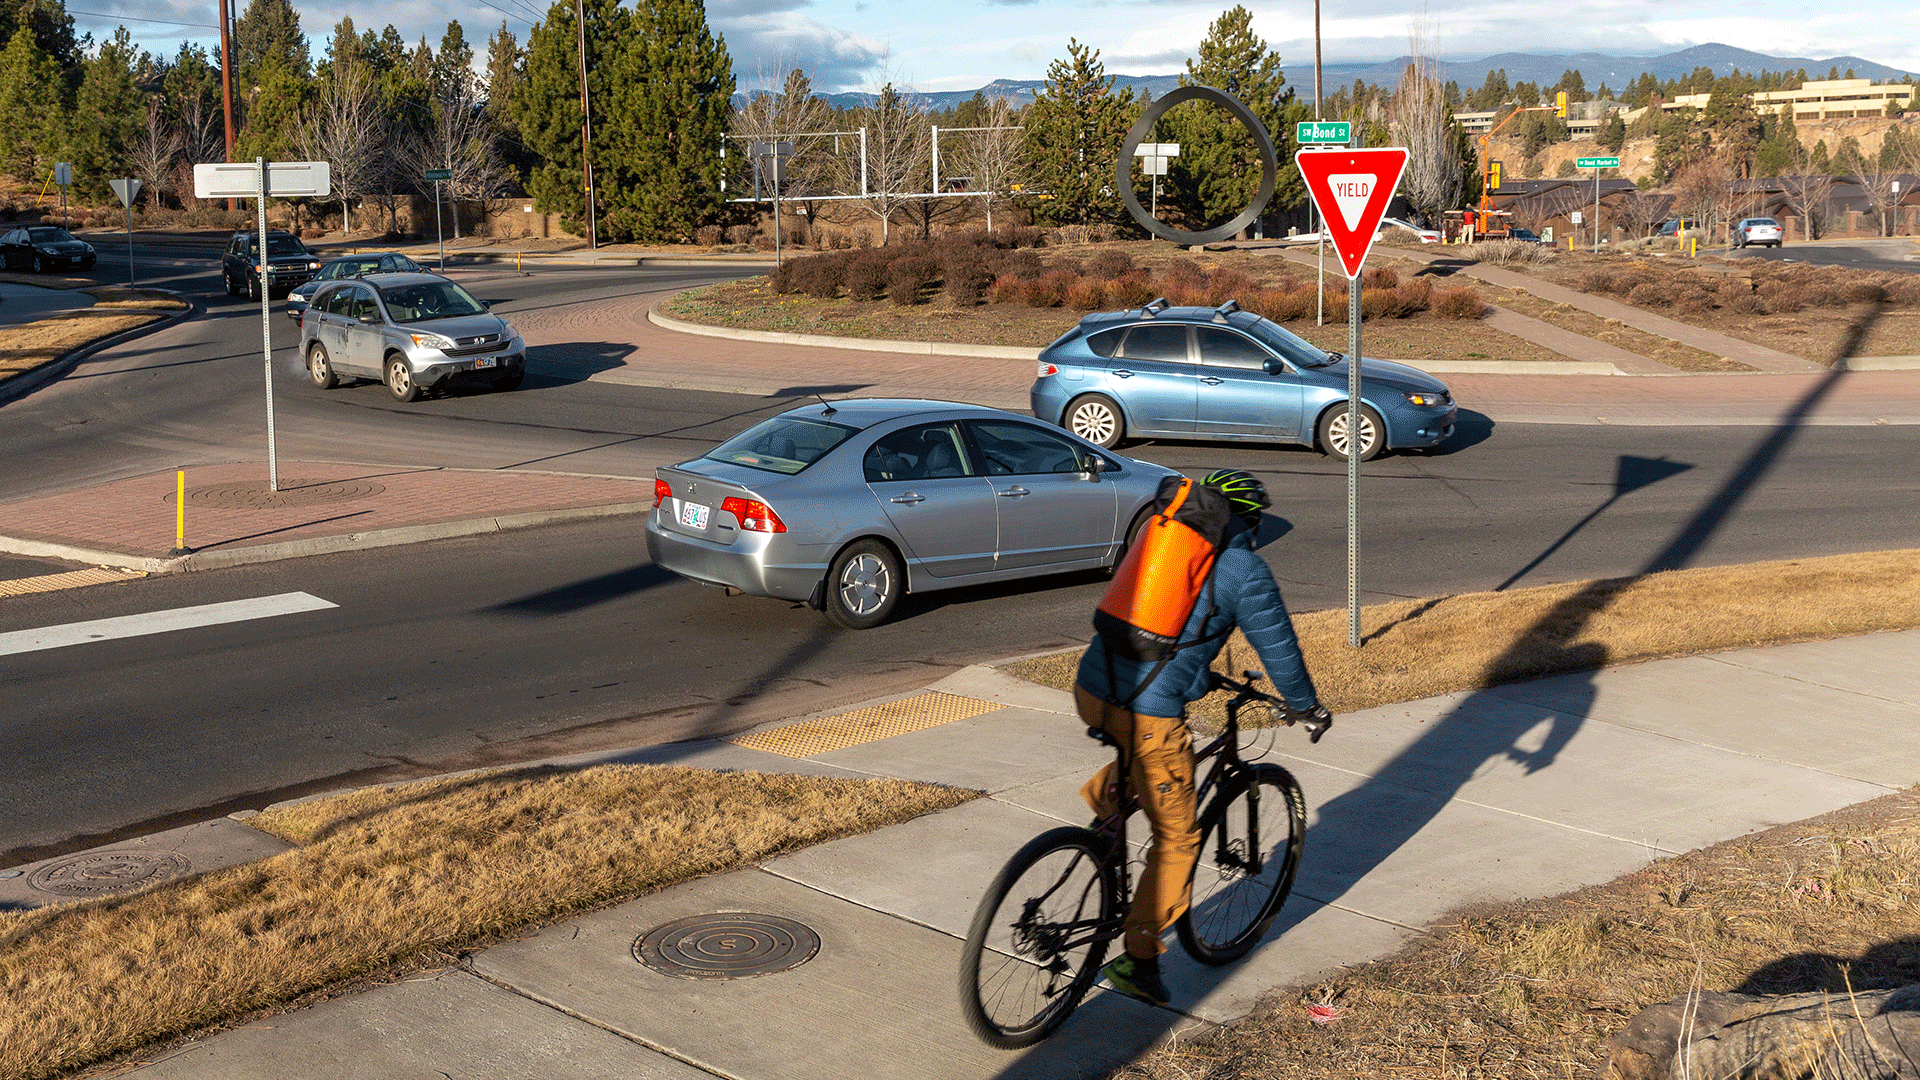 Image of an entering leg of a single-lane roundabout. A bicyclist is seen approaching the roundabout on the sidewalk, while several vehicles are seen traveling through the roundabout. The roundabout corners have the PROWAG-required edge treatment in the form of landscaping.